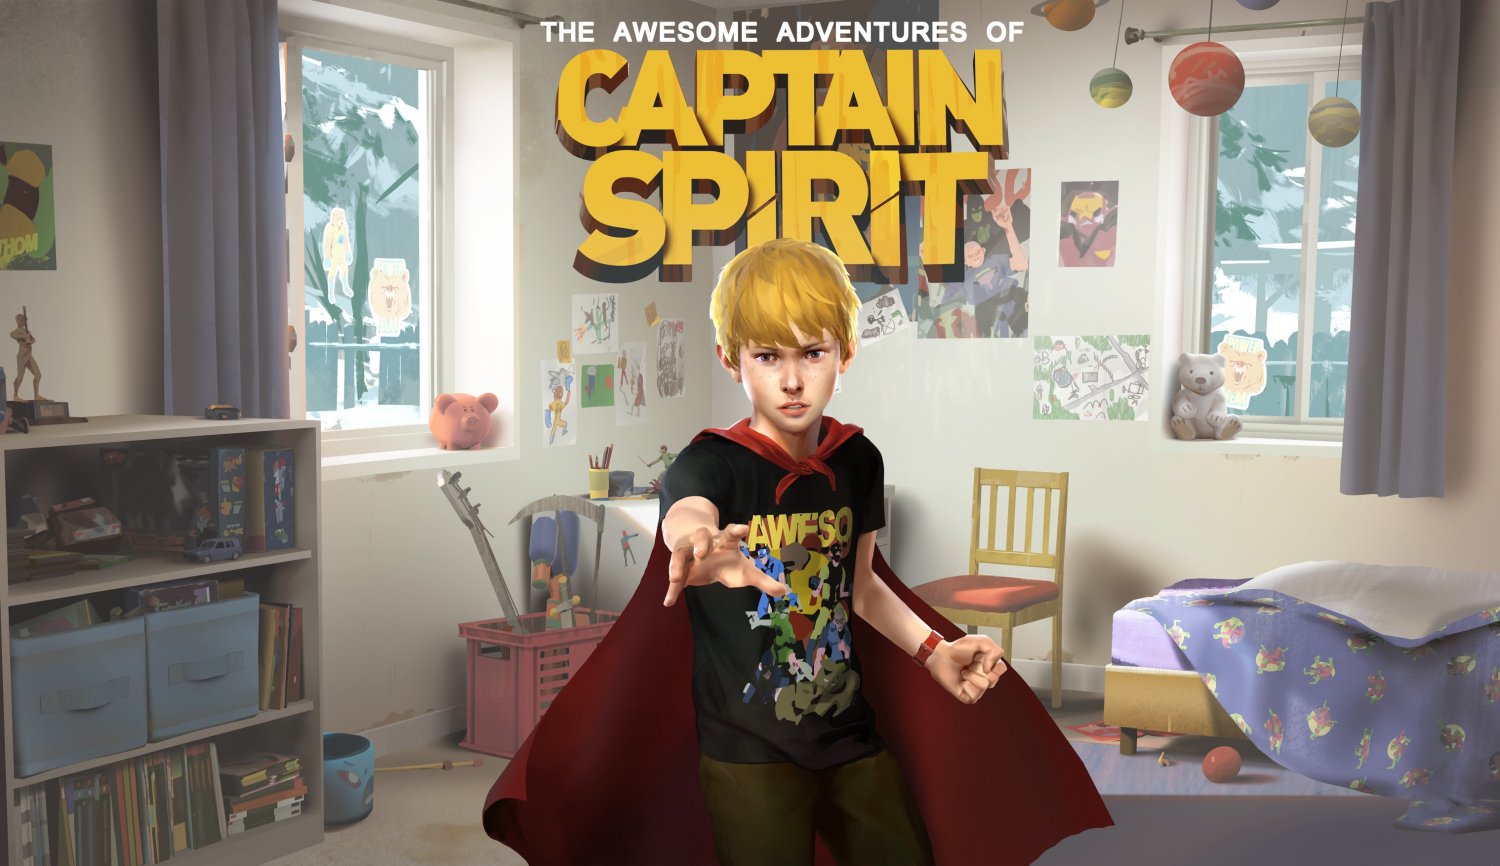 The Awesome Adventures of Captain Spirit  13"x19" (32cm/49cm) Polyester Fabric Poster